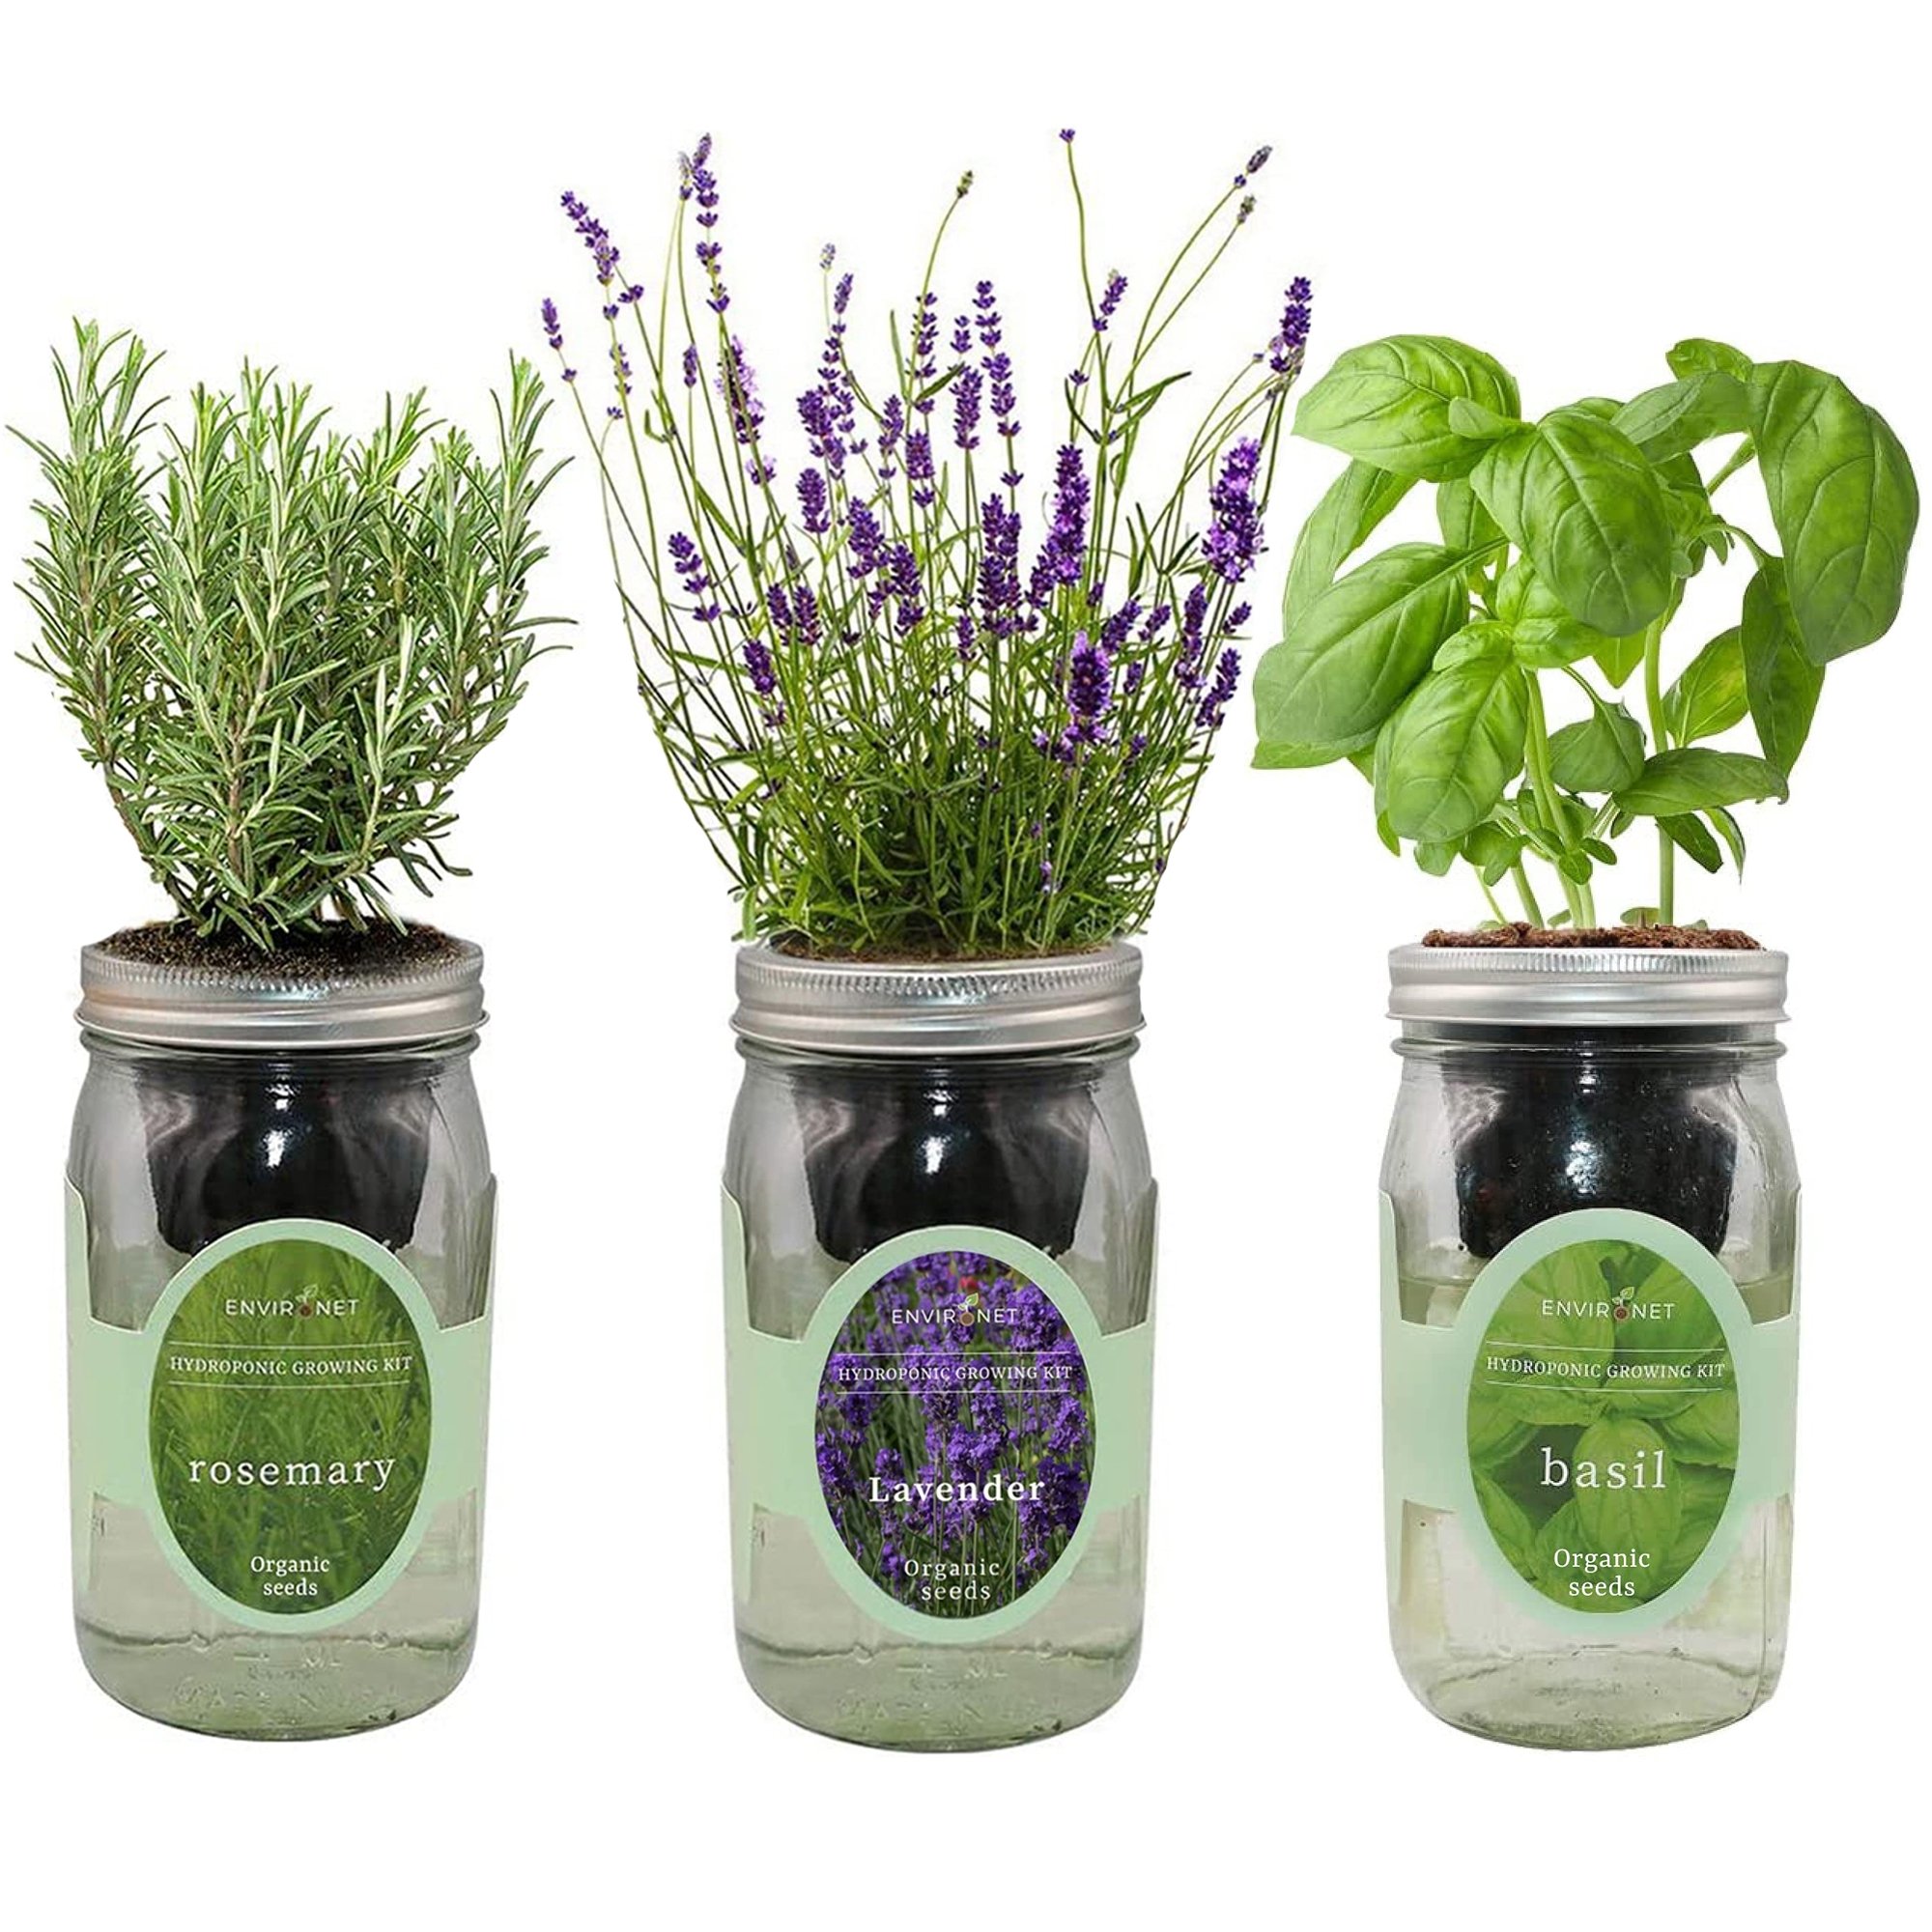 Hydroponic Herb Growing Kit Set with Organic Seeds - Lavender, Rosemary, Basil